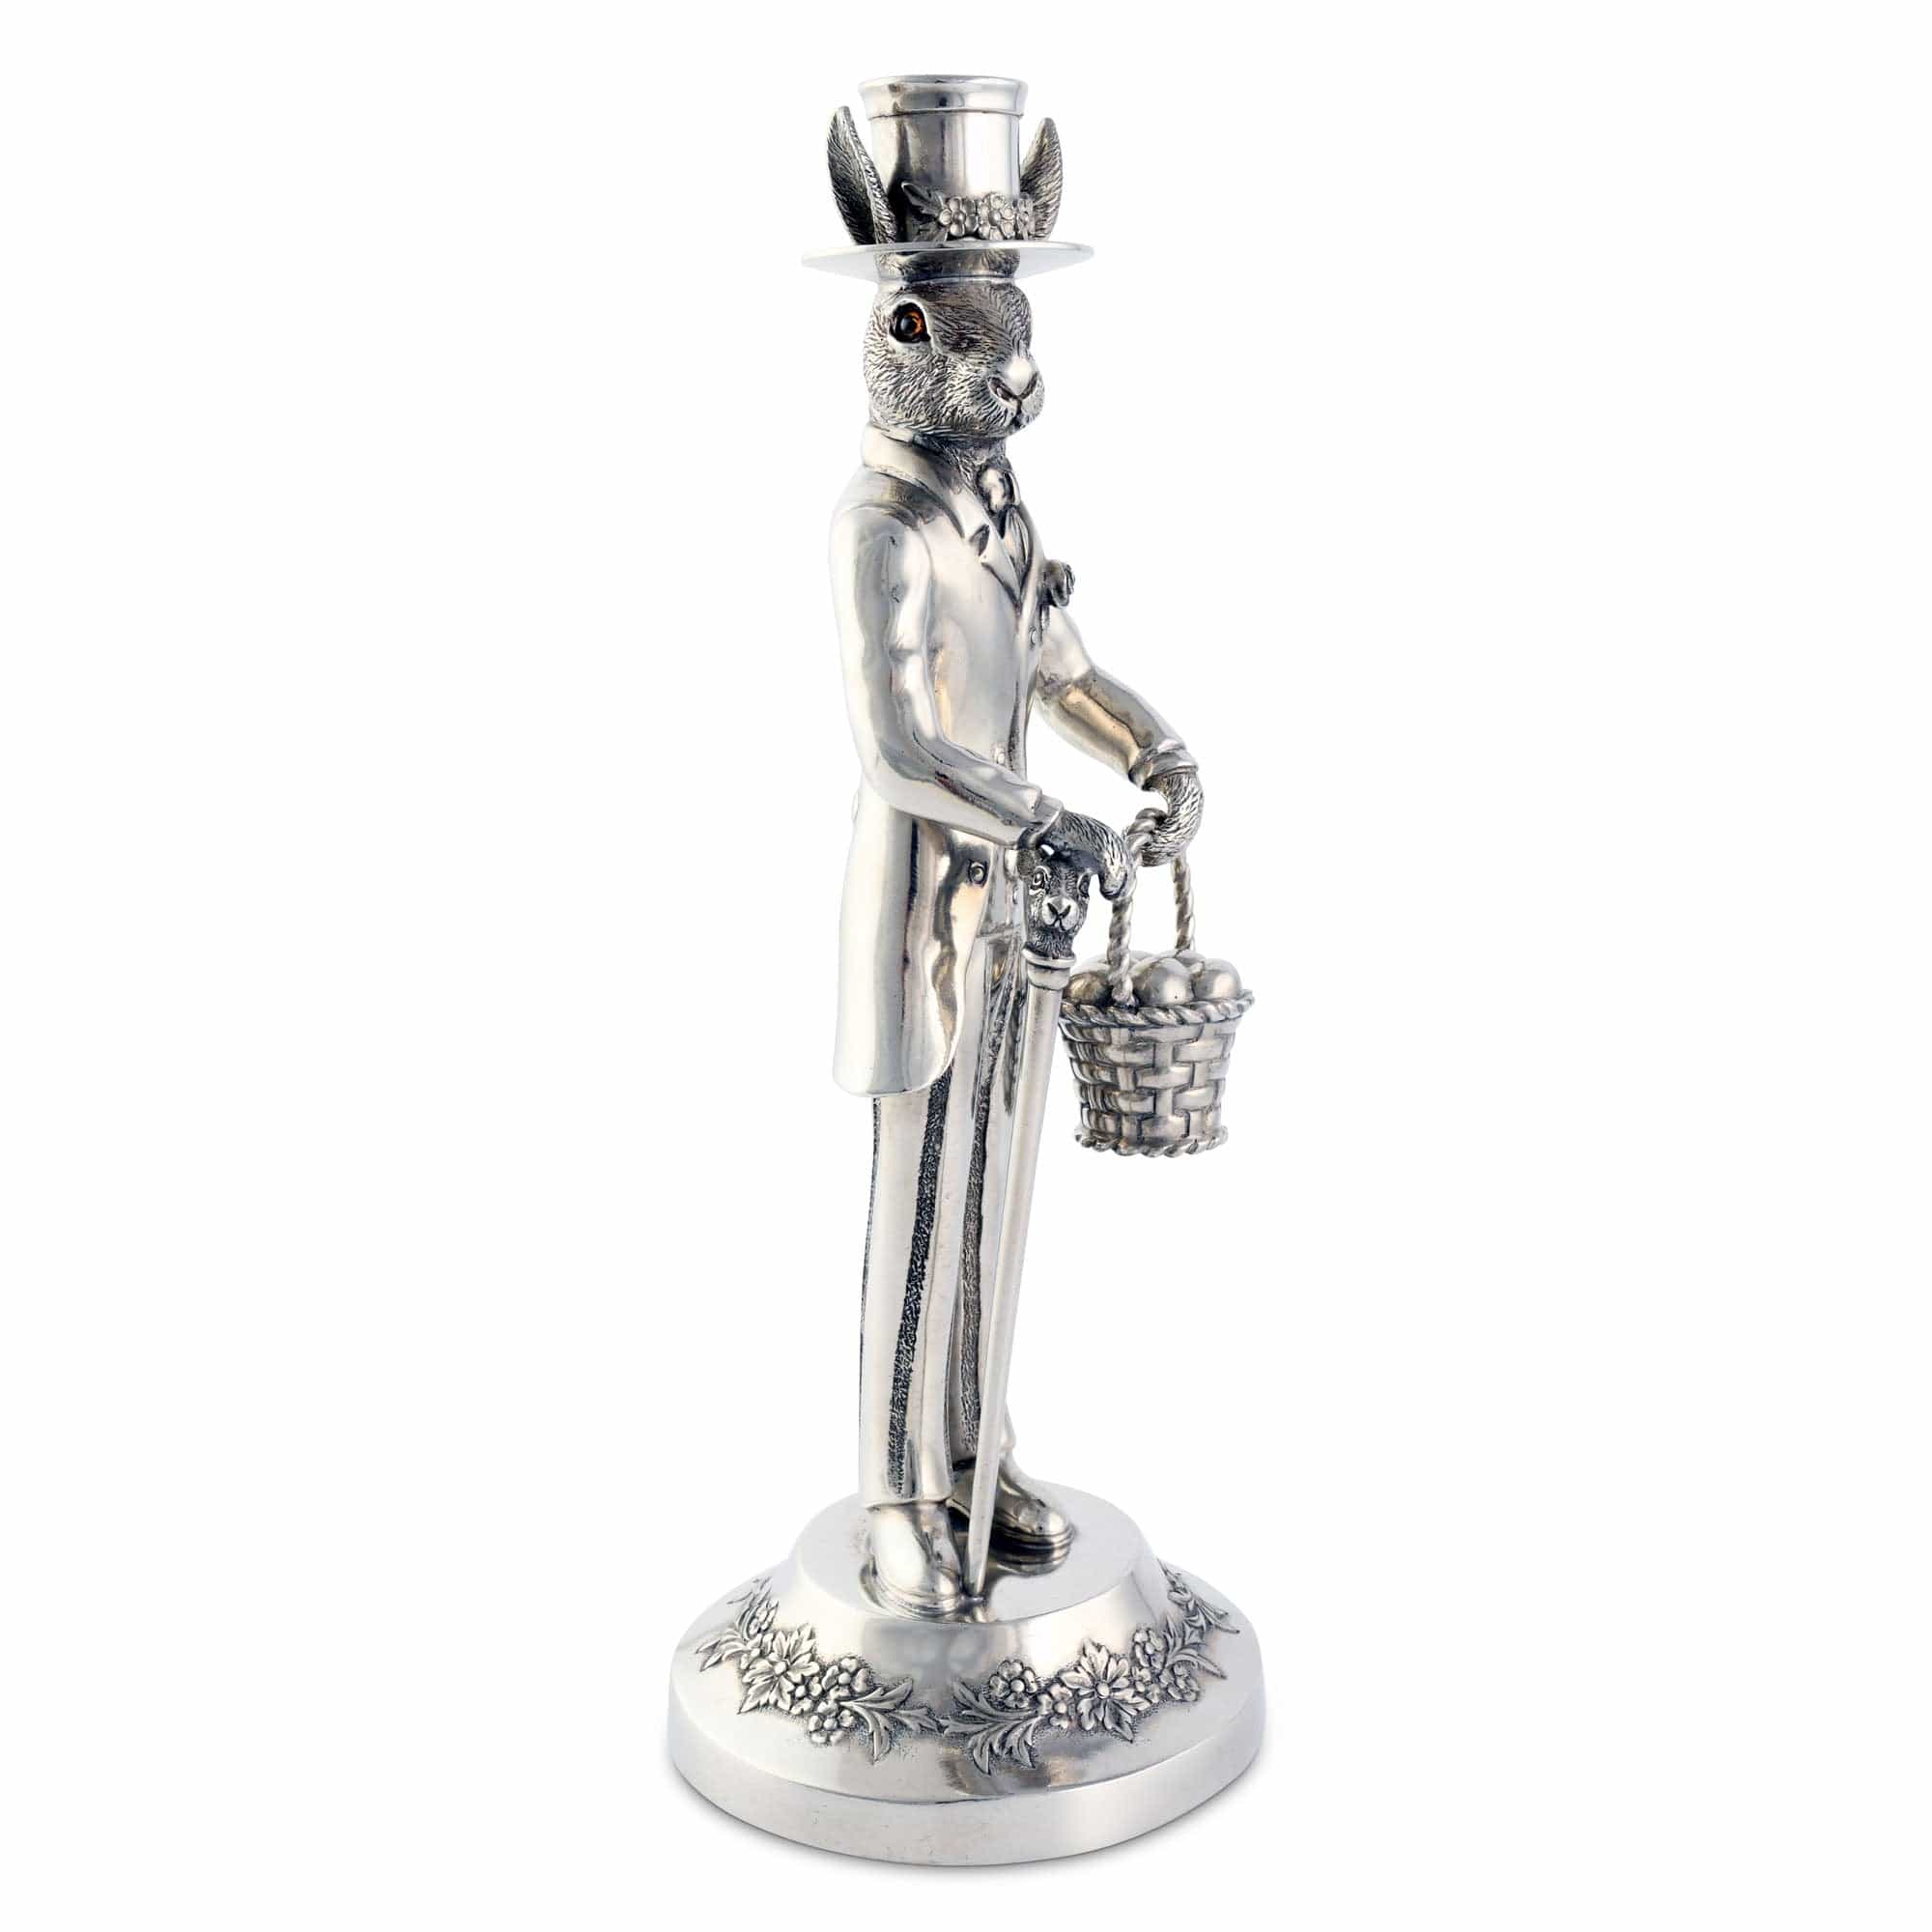 Vagabond House Pewter Winter Berry Candlestick Tall 11.5 inch Tall